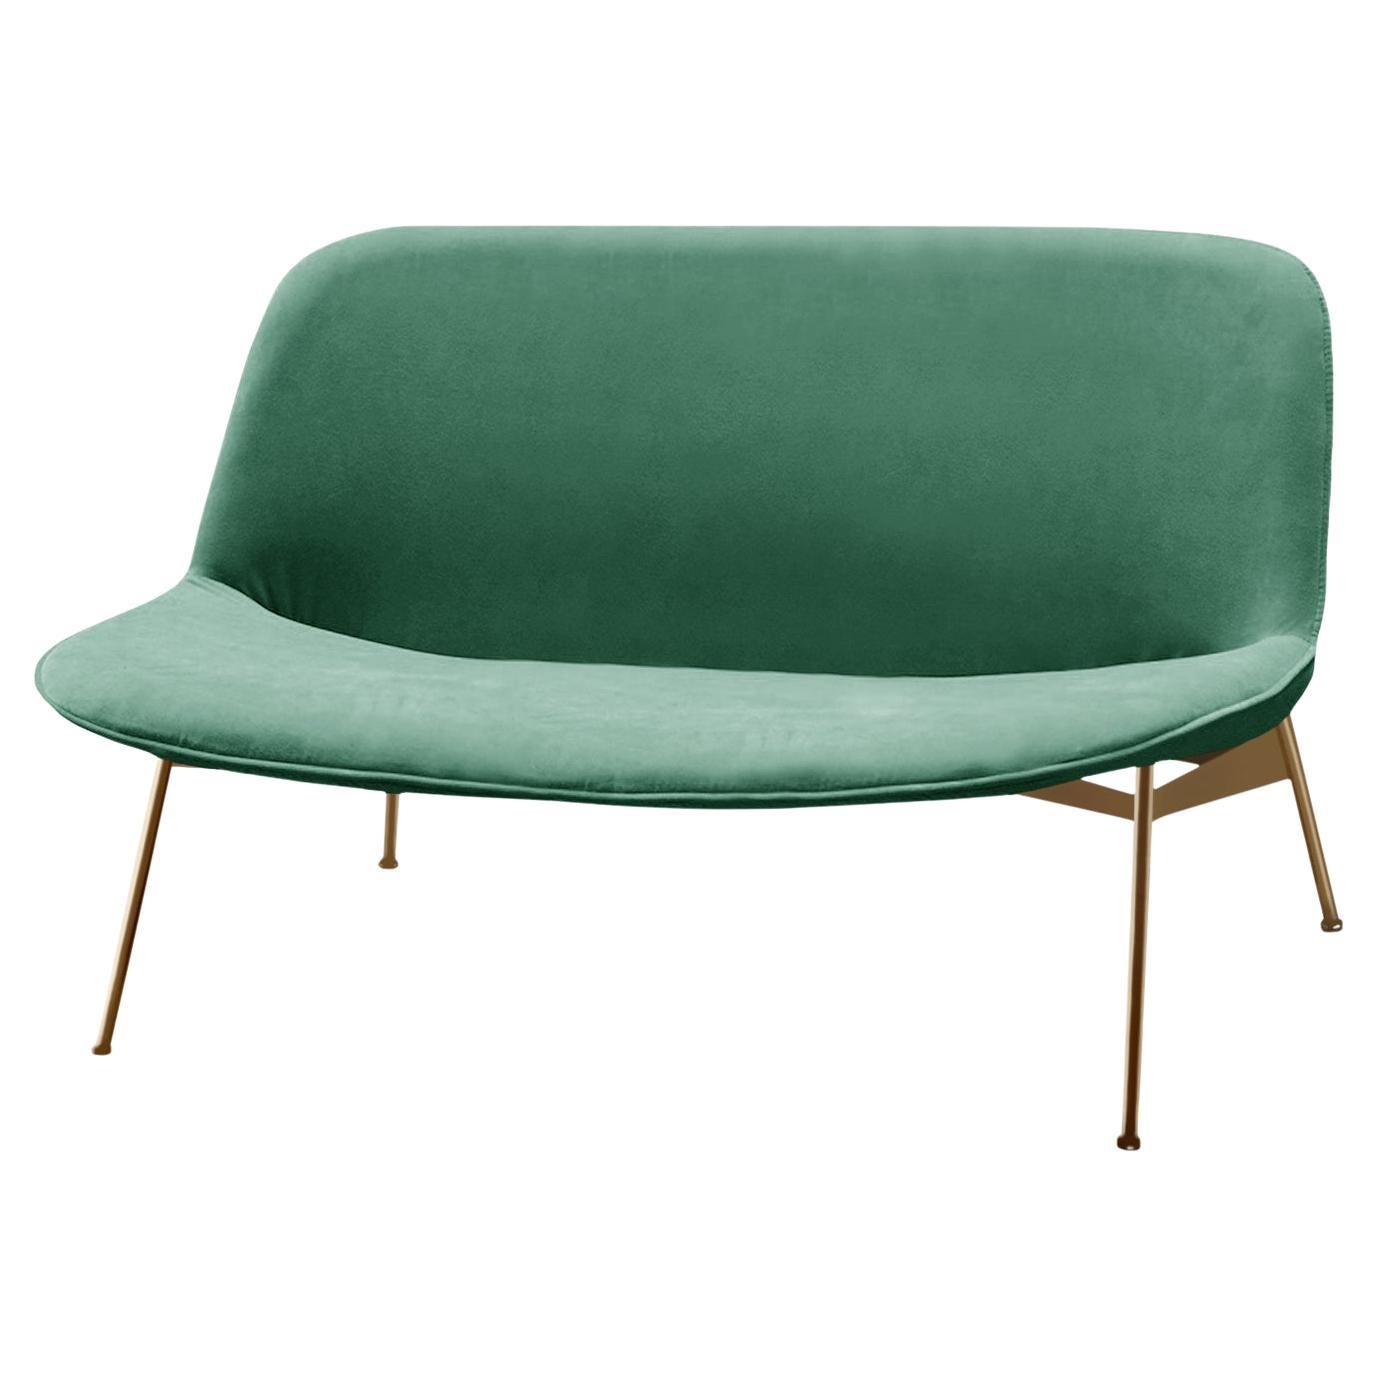 Chiado Sofa, Large with Paris Green and Gold